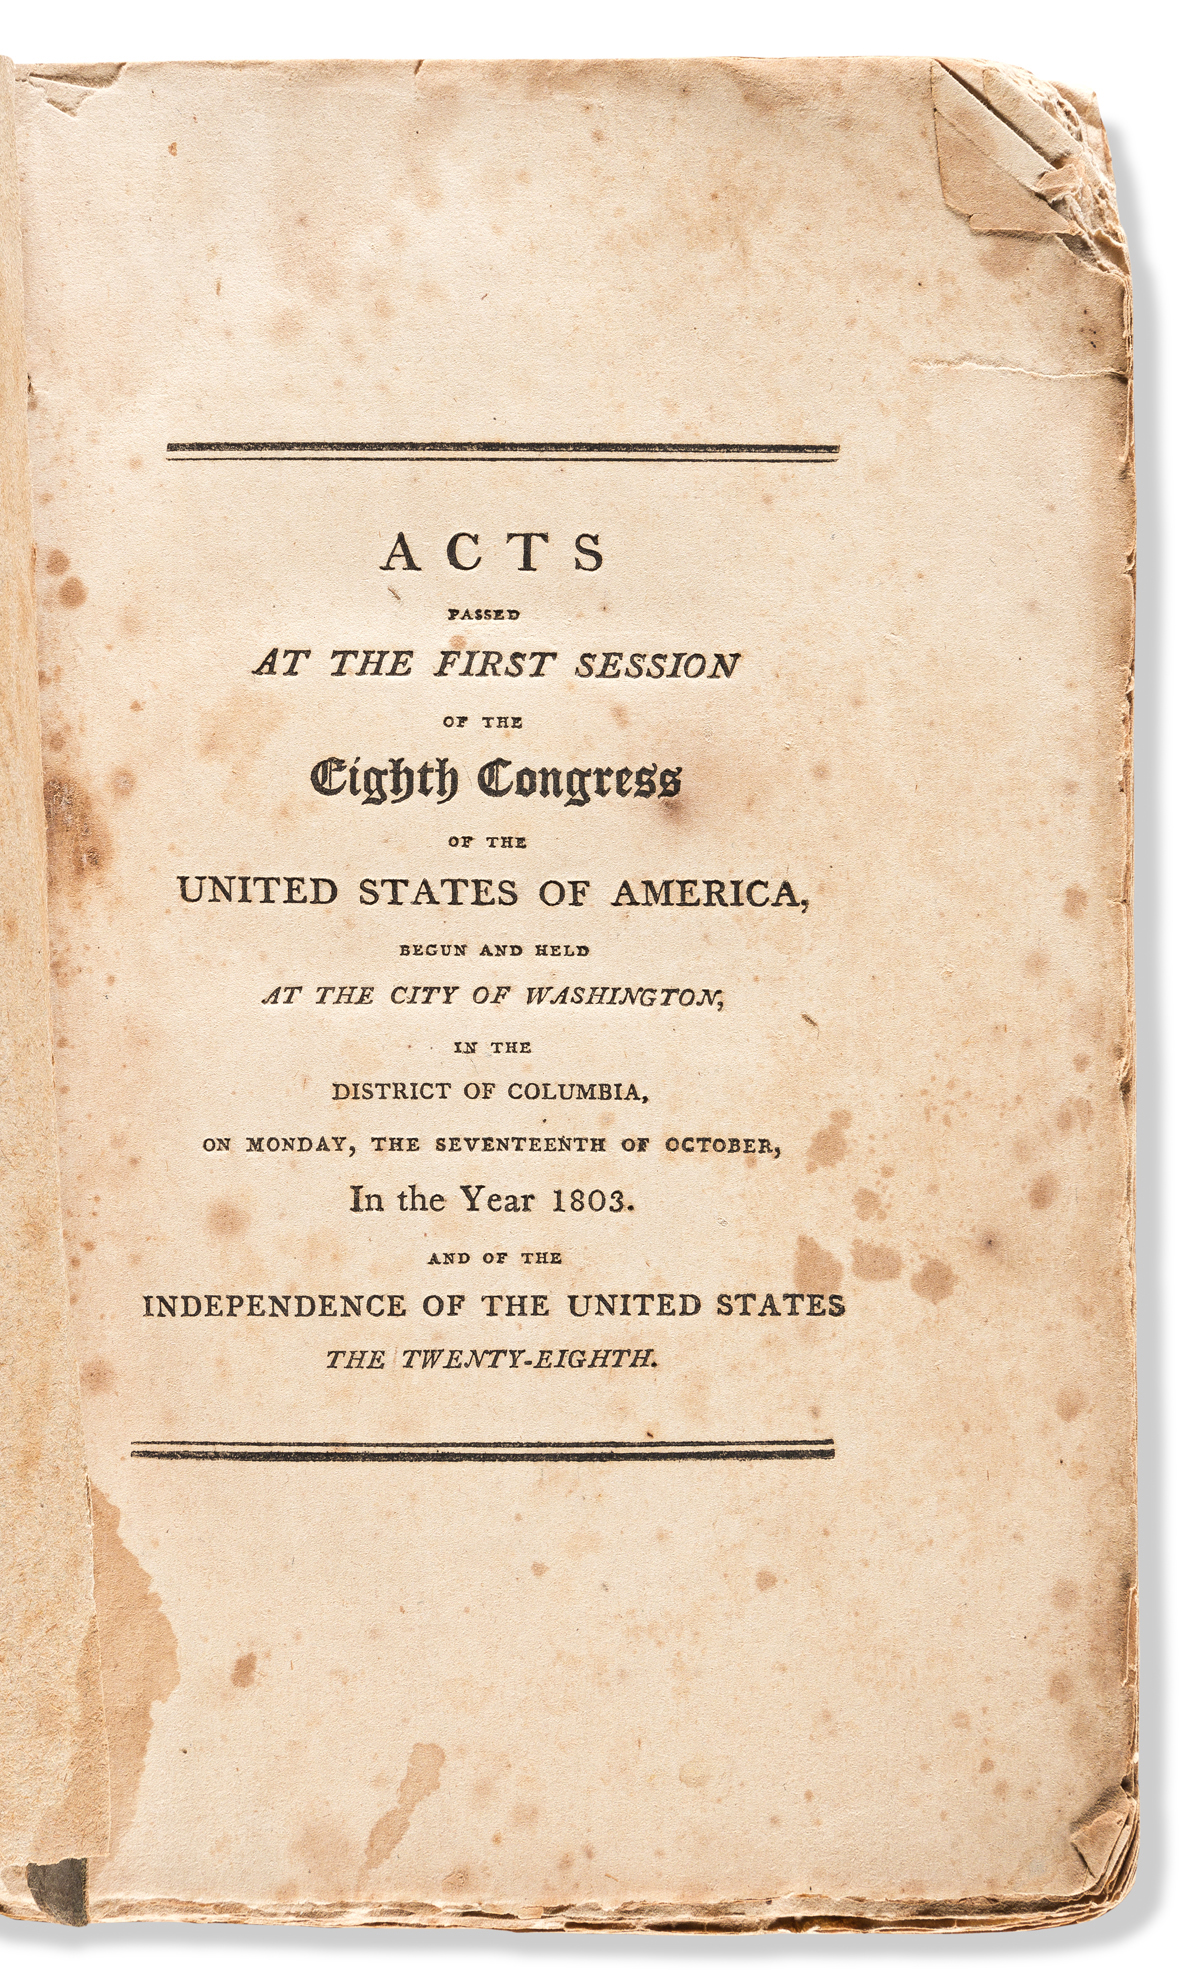 (LAW.) Acts Passed at the First Session of the Eighth Congress of the United States of America.